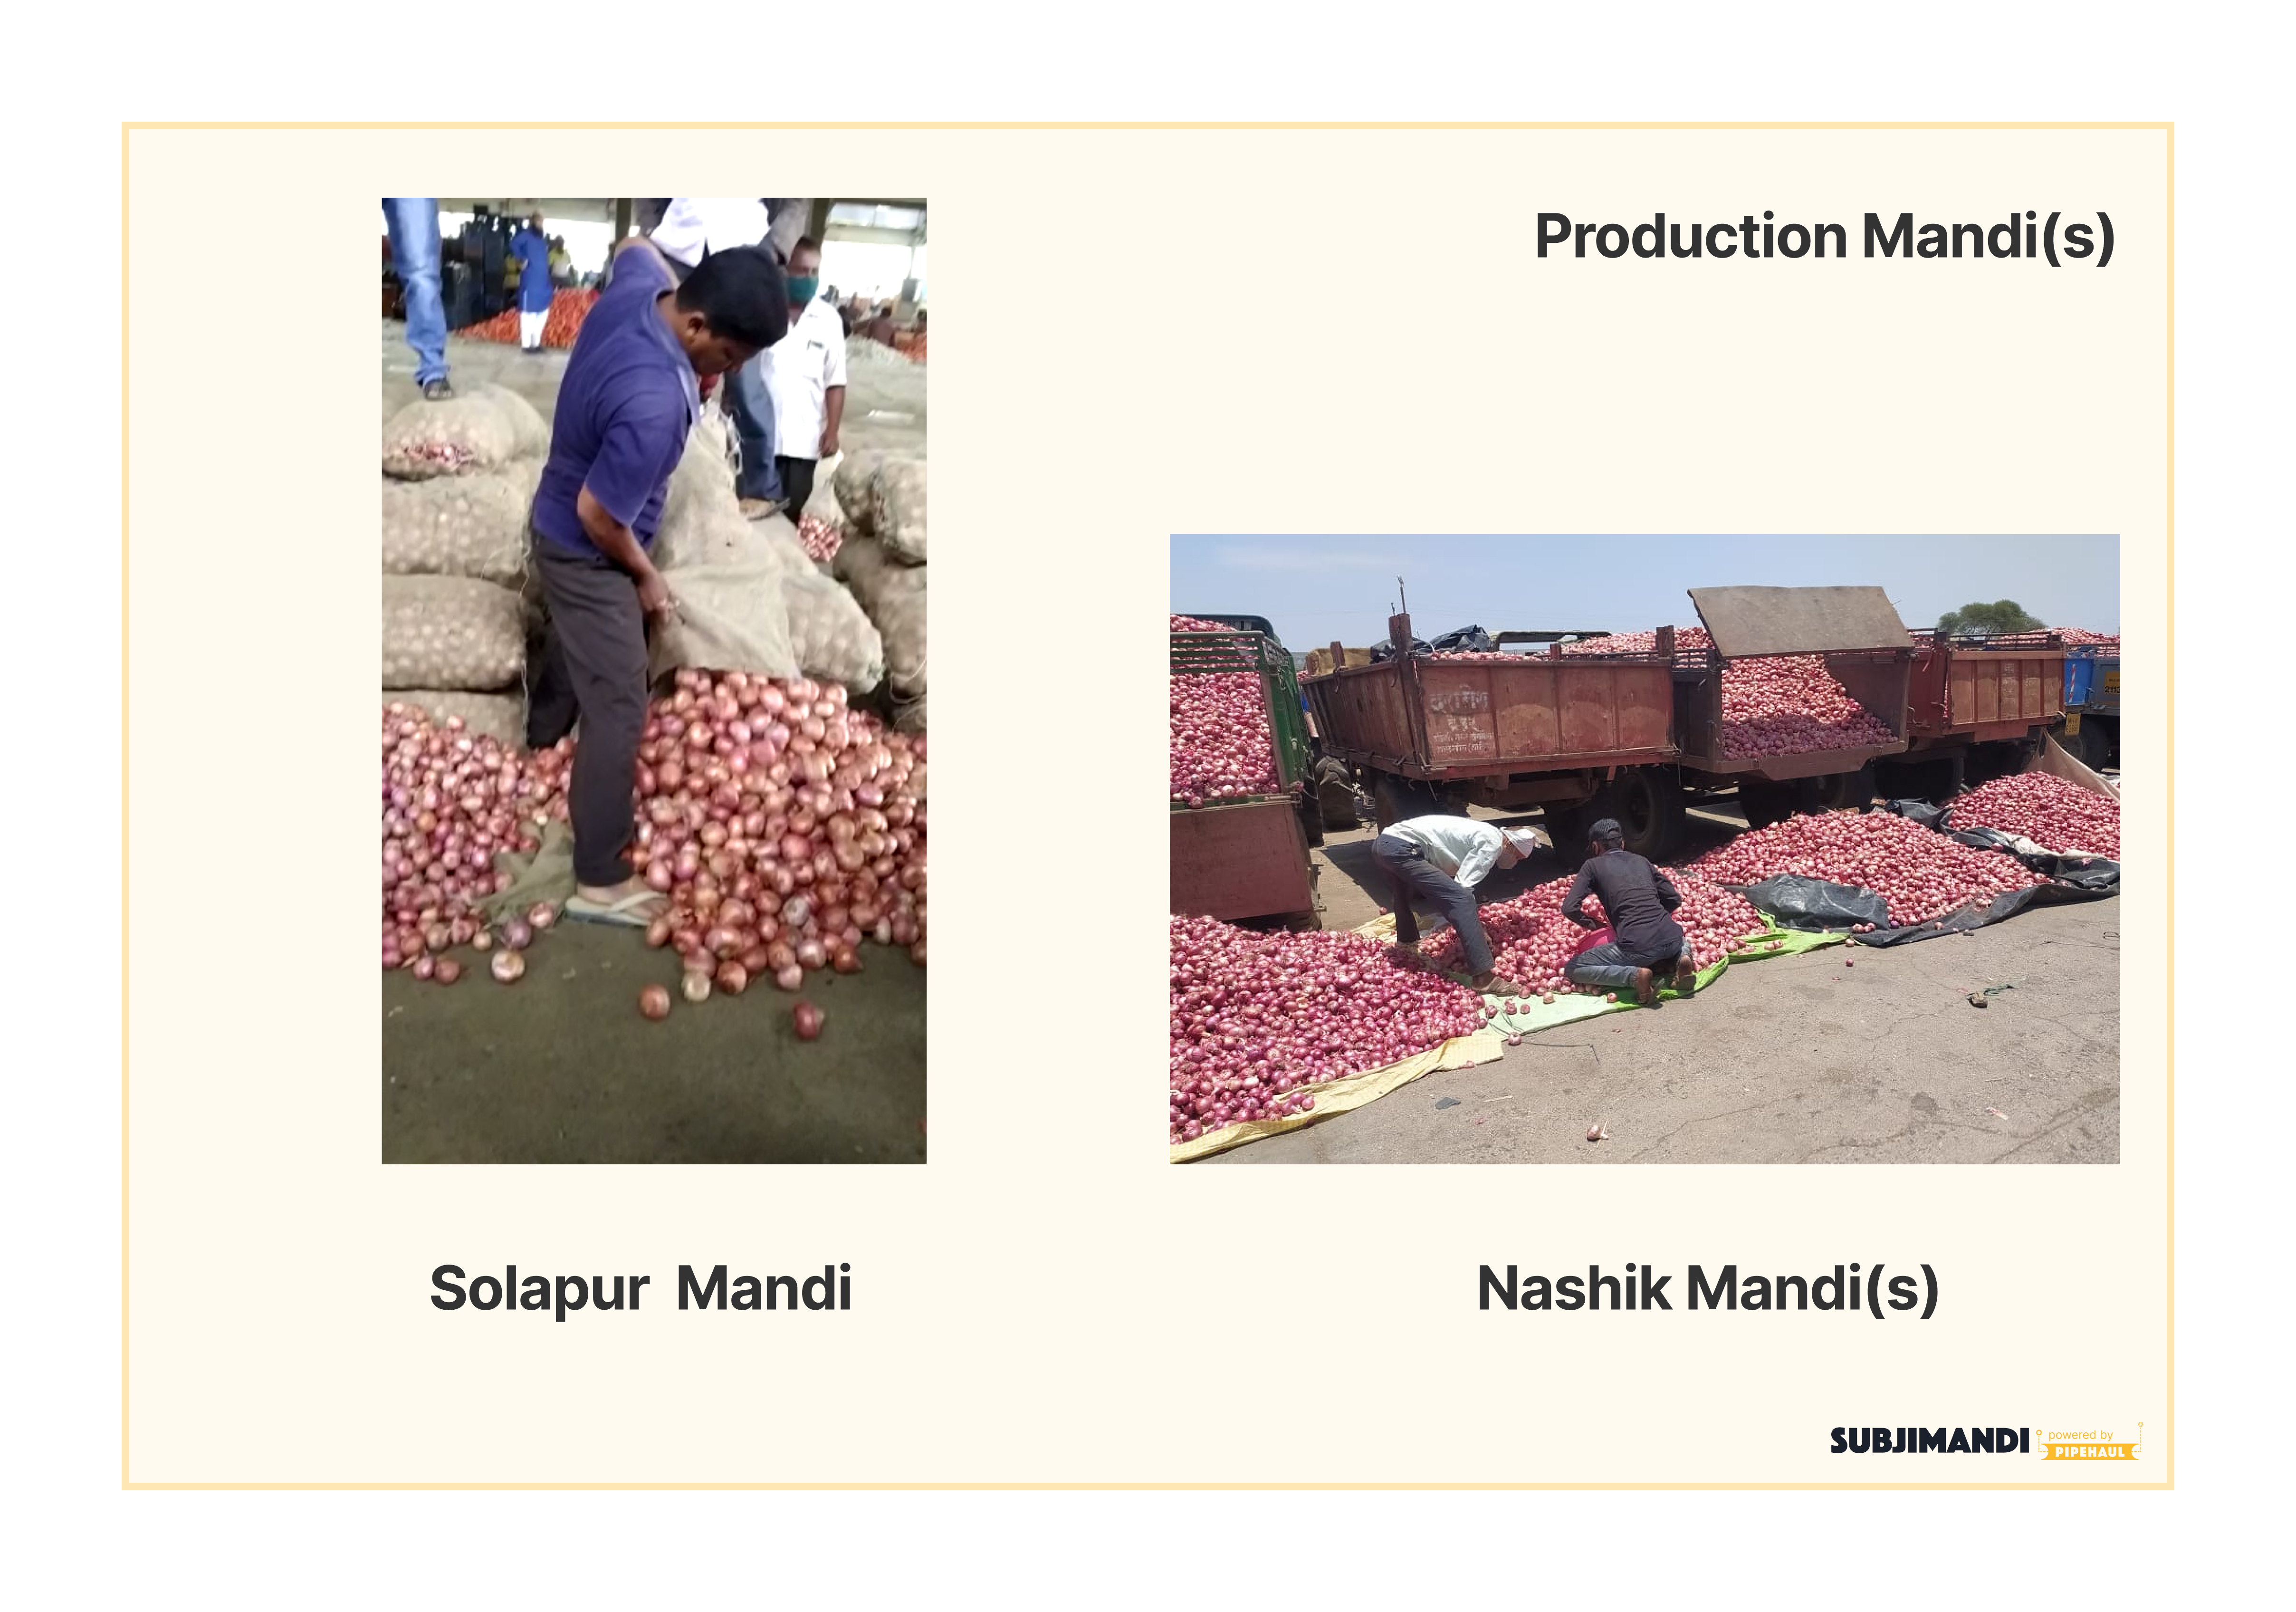 The different modes of sales in Mandi